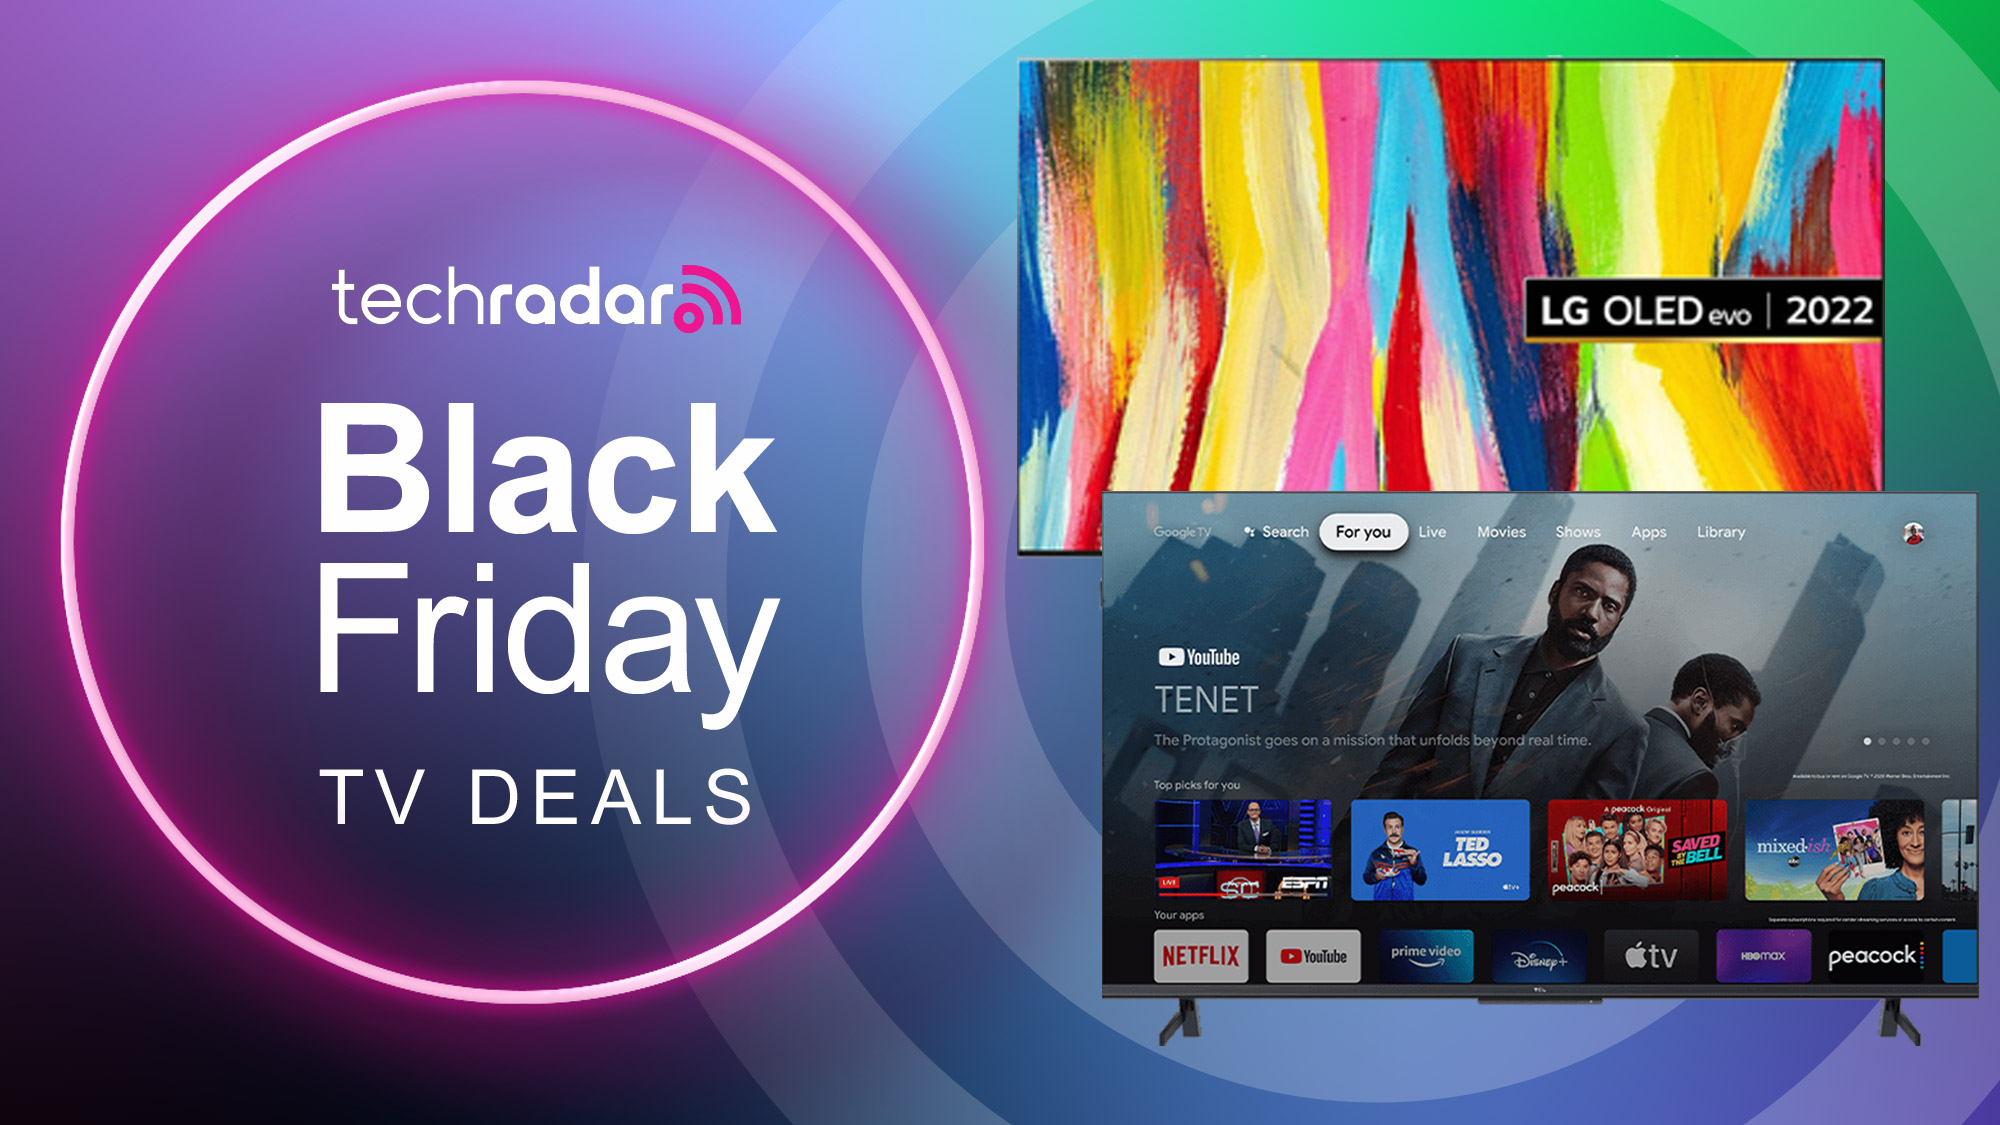 Best 75-inch TV Black Friday Deals for 2022